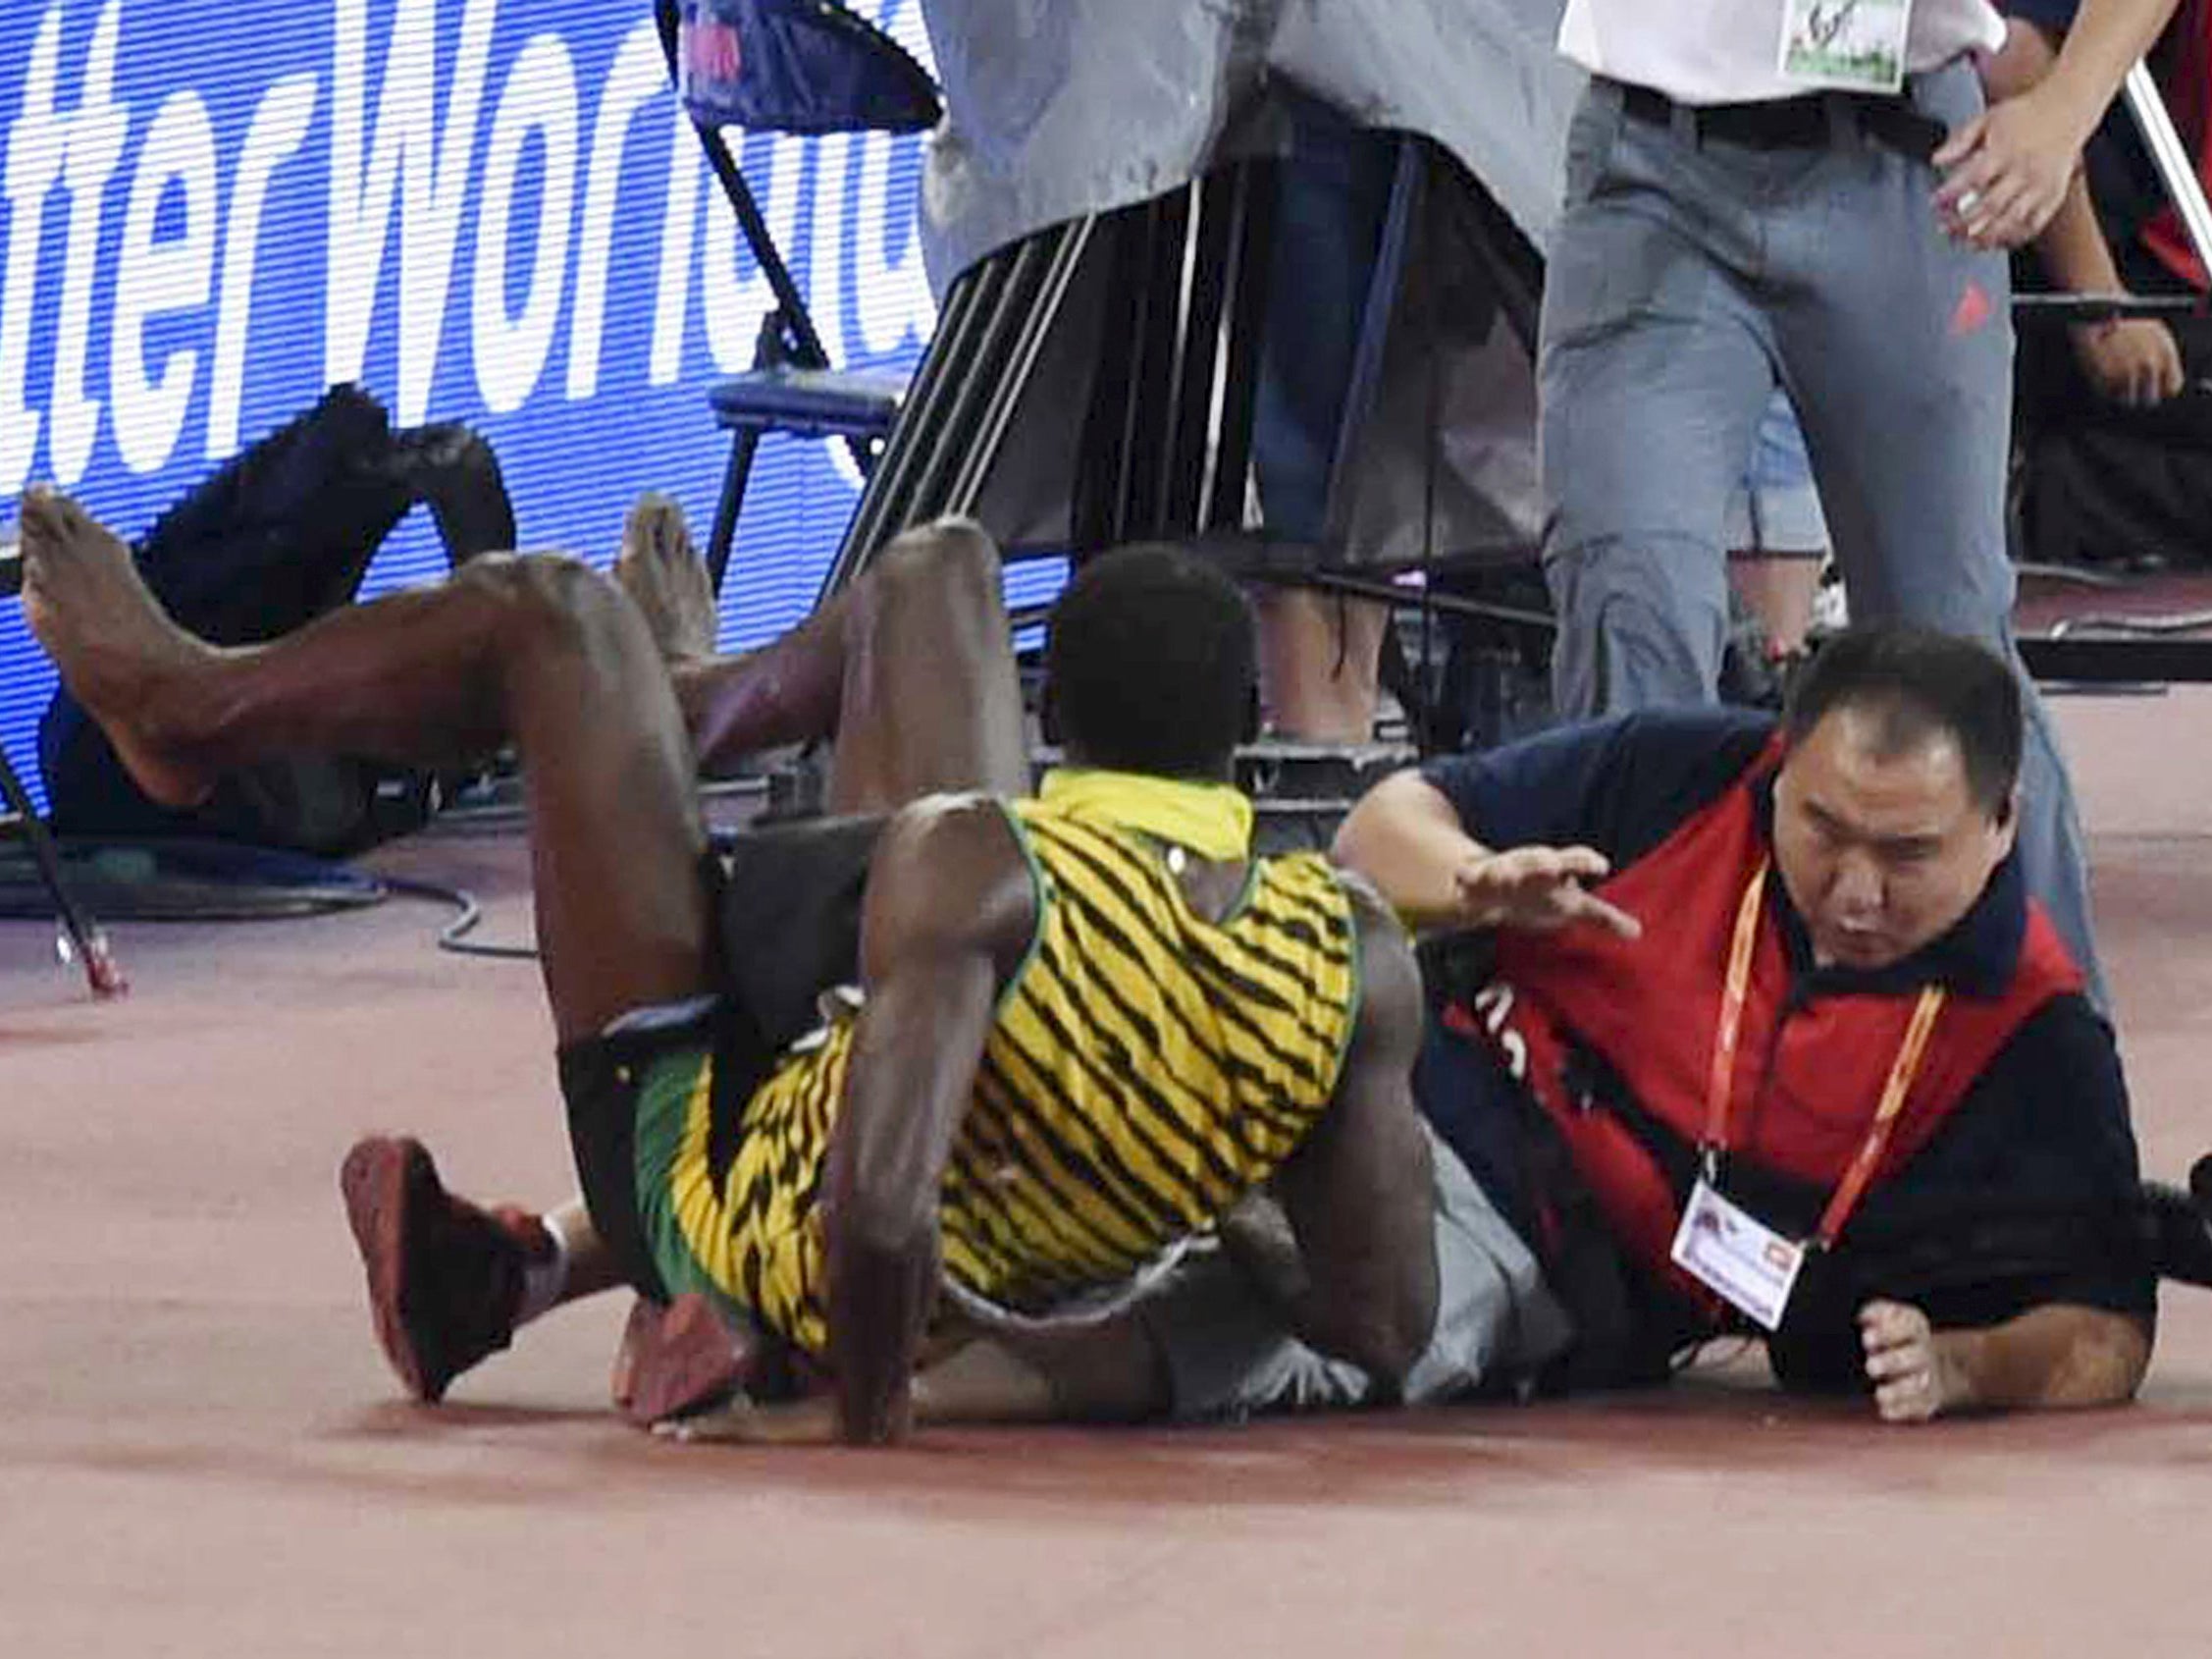 Usain Bolt of Jamaica (L) falls after being knocked over by a cameraman (R) on a Segway after winning the men's 200 metres final